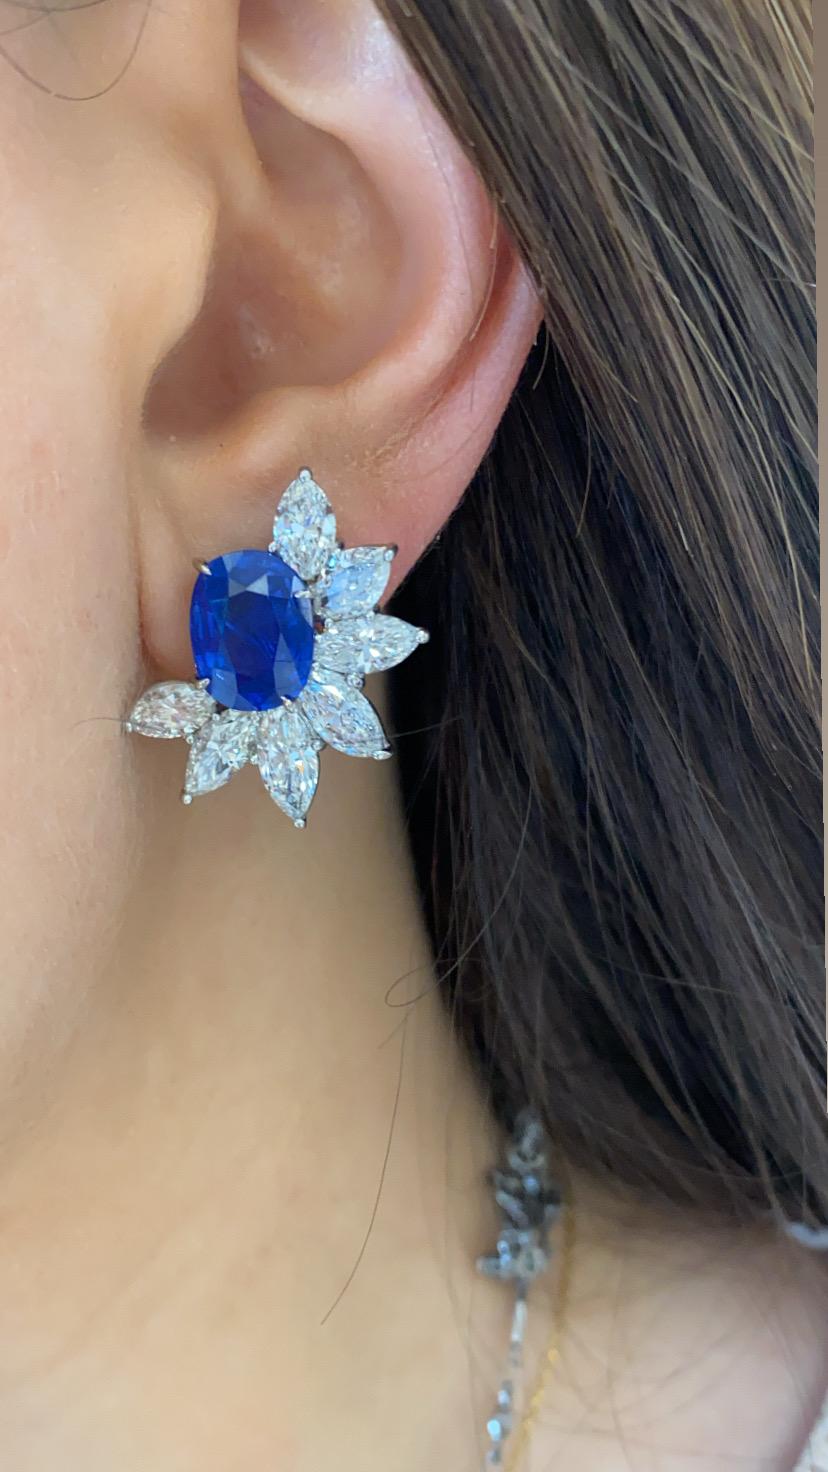 14 White Marquise diamonds totaling in 7.2 carat weight are clustered around magnificent ceylon unheated oval sapphires totaling in 9.98 carats. Set in platinum. In true Harry Winston style, these earring feature a cluster design of brilliant